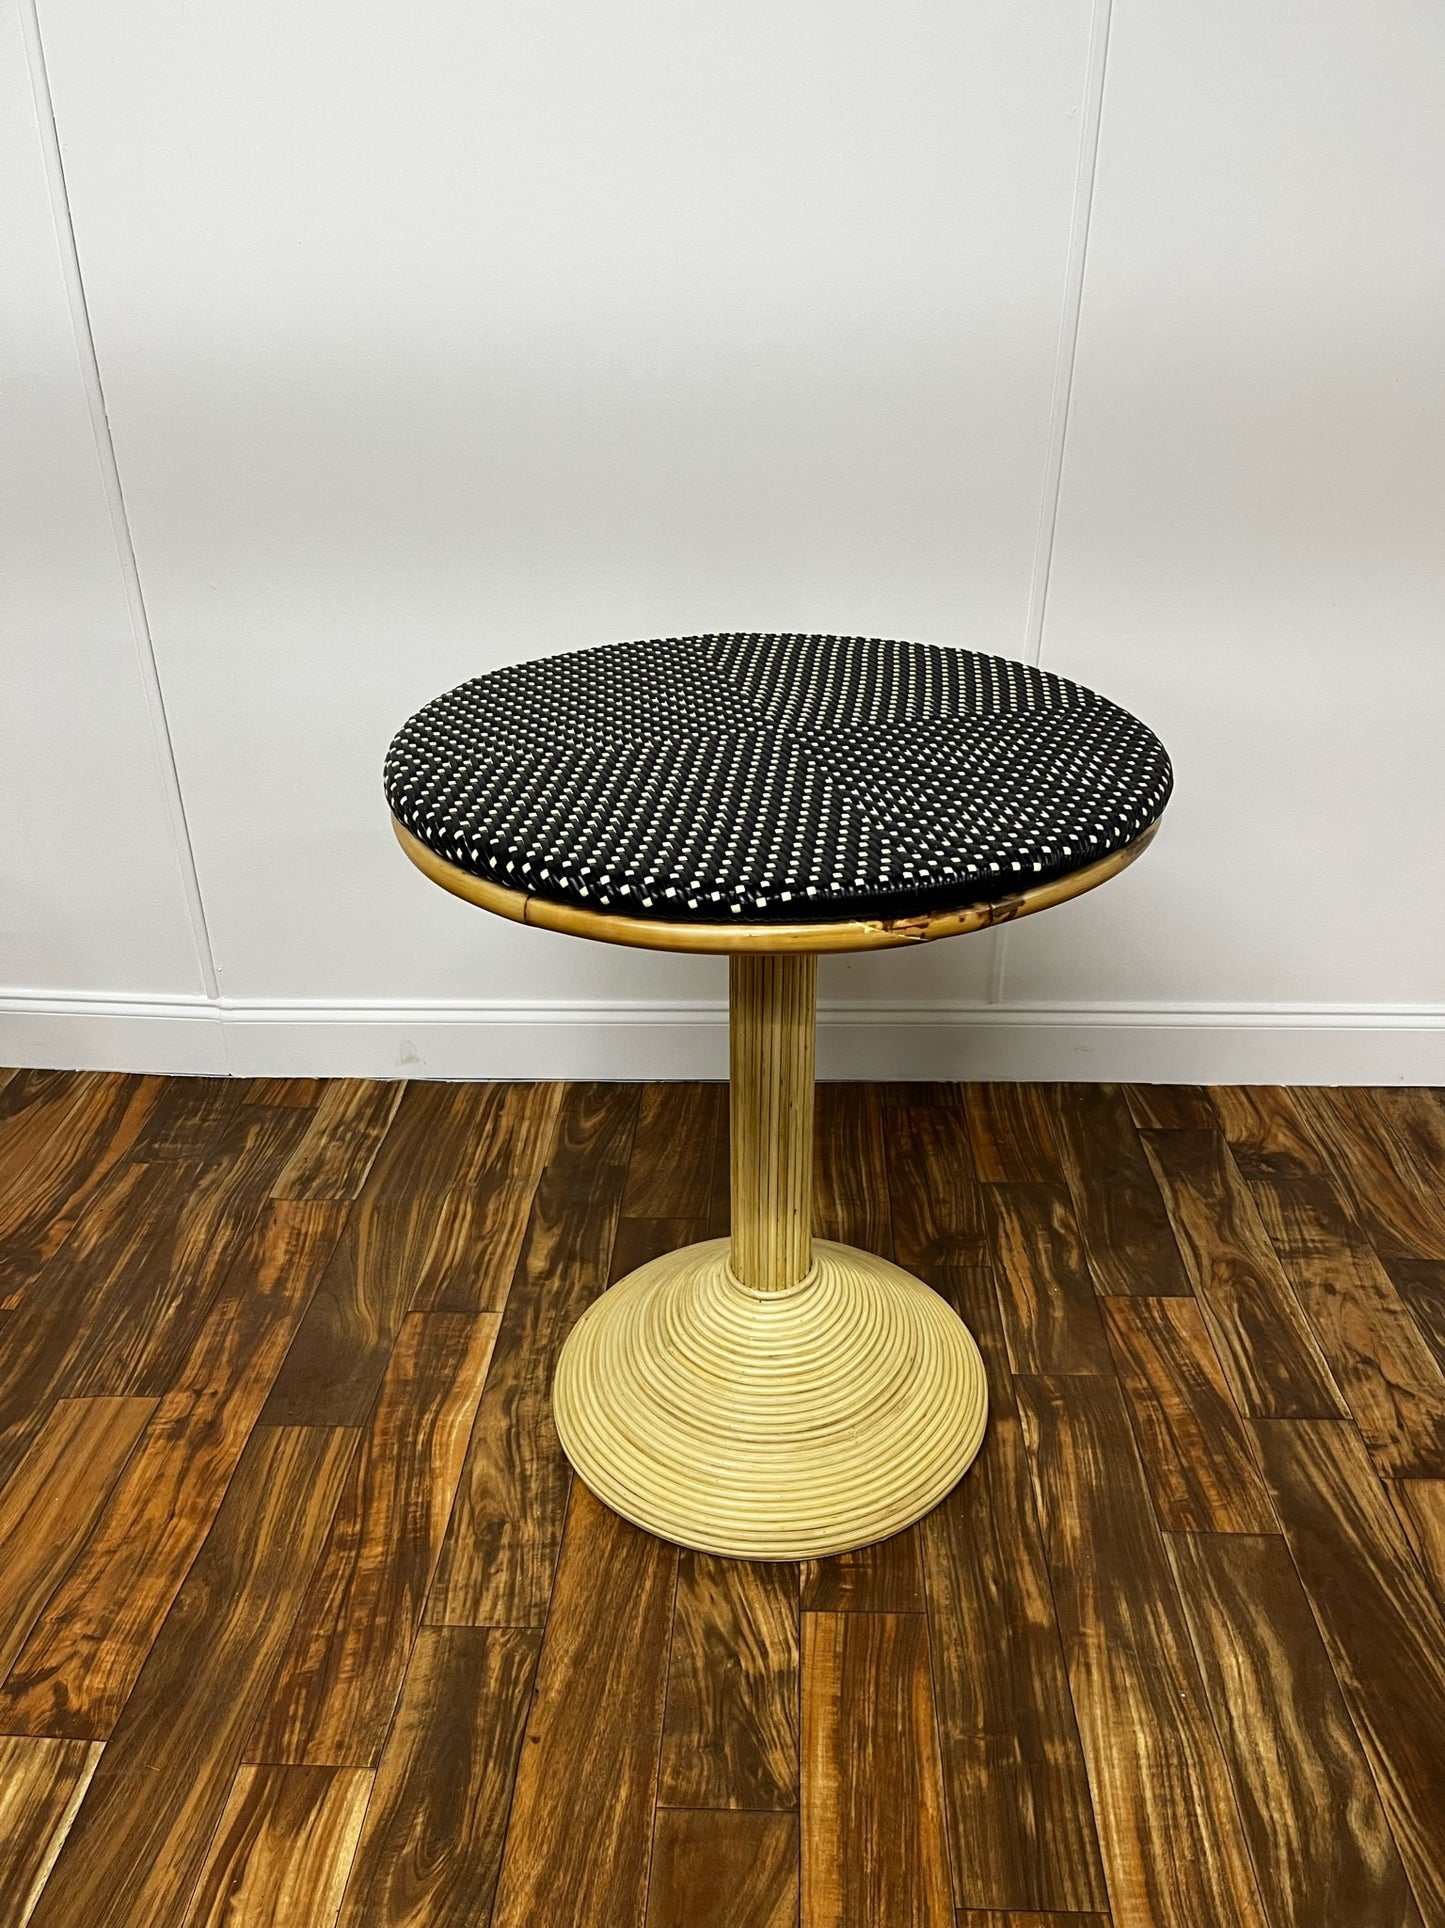 BLACK AND WHITE WICKER BAR TABLE